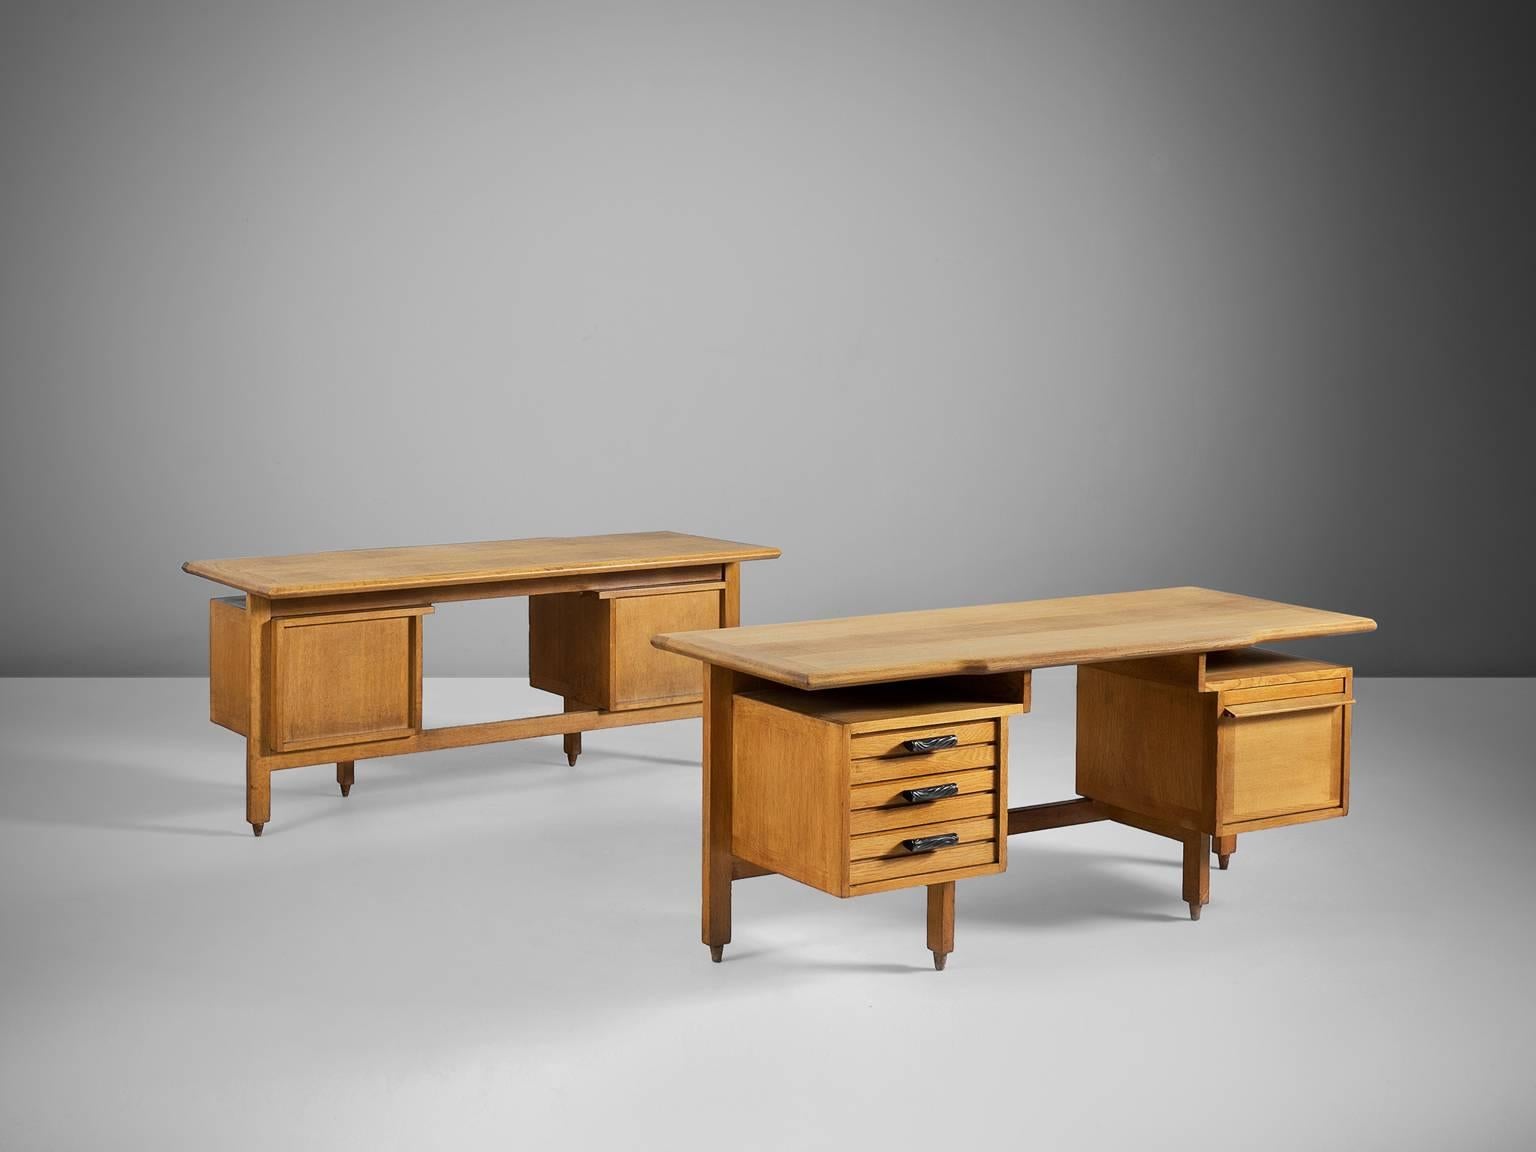 Guillerme et Chambron, set of oak desks, France, 1950s.

This desk has a large work surface and are equipped with plenty of storage space due well decorated drawers with ceramic handles on the left and one large compartment on the right. It even